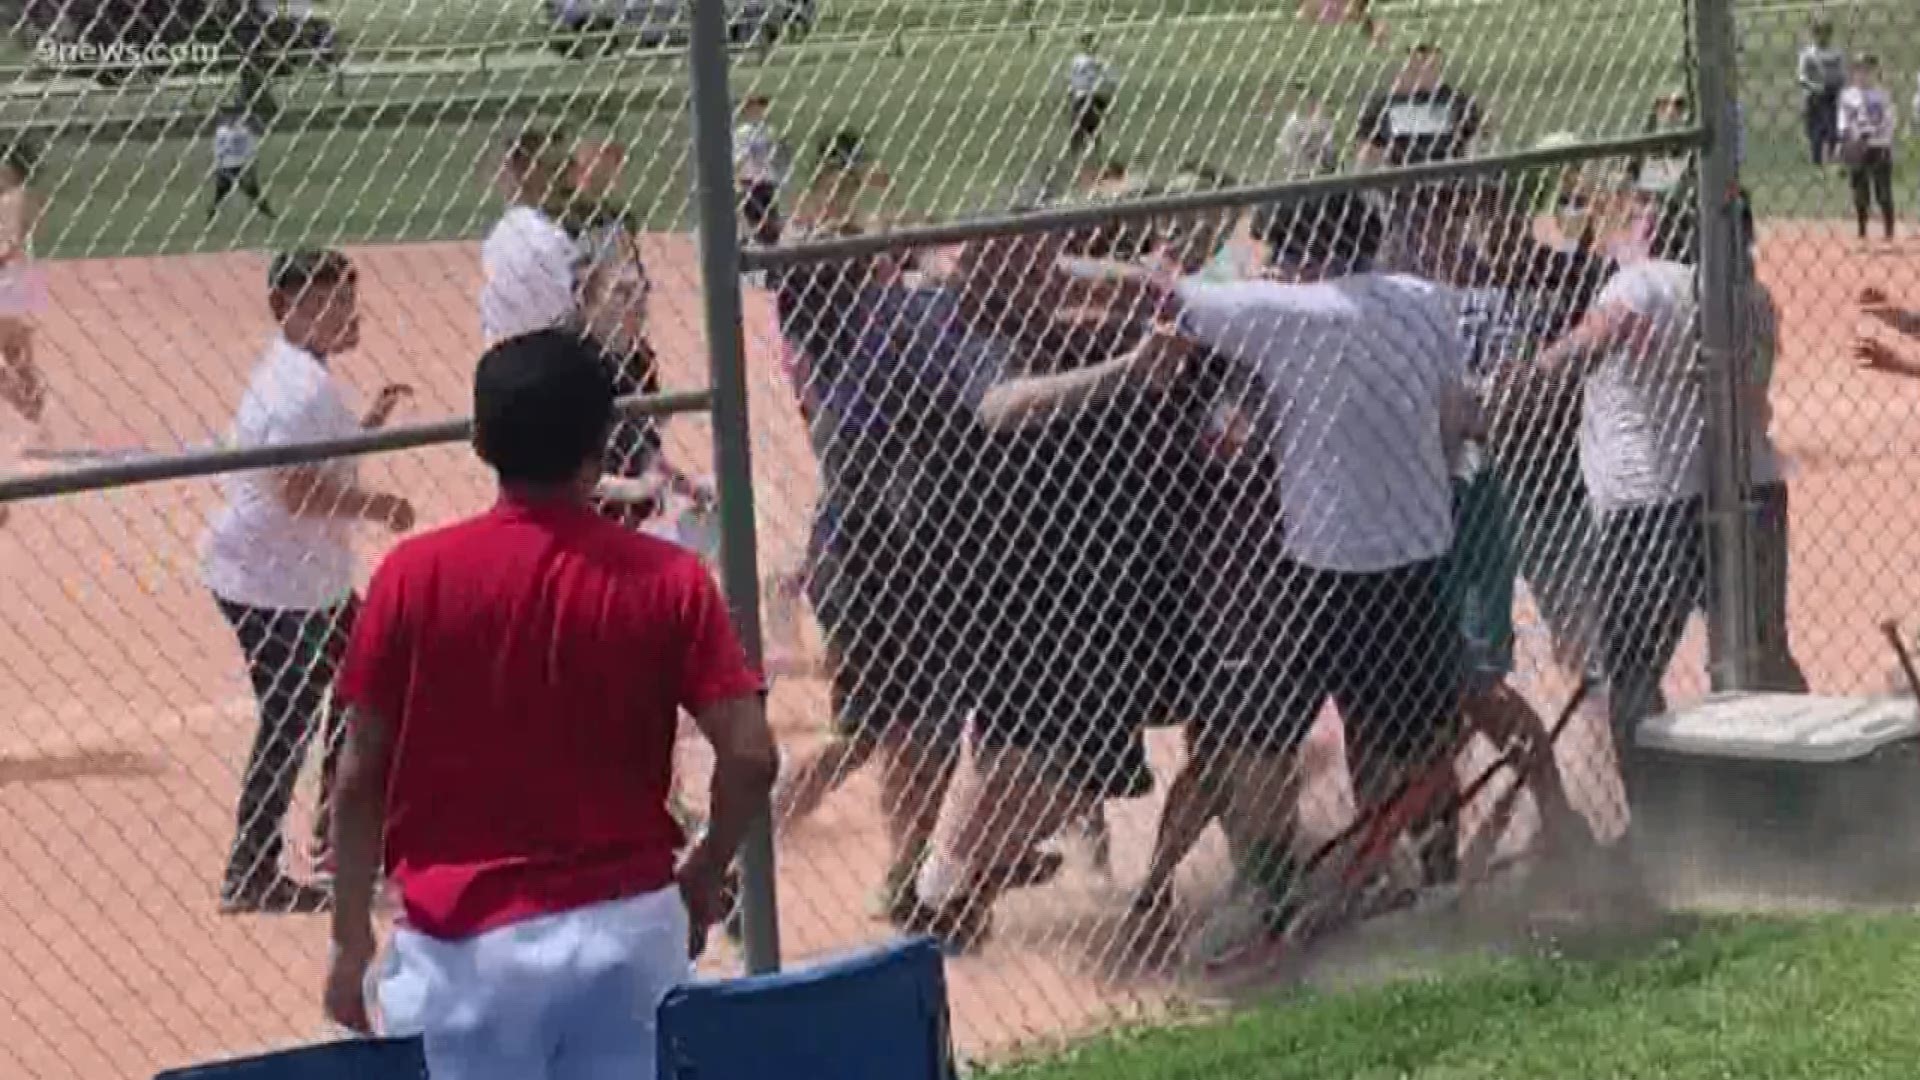 The umpire said he had warned parents about using foul language in front of 7-year-olds before the fight broke out.